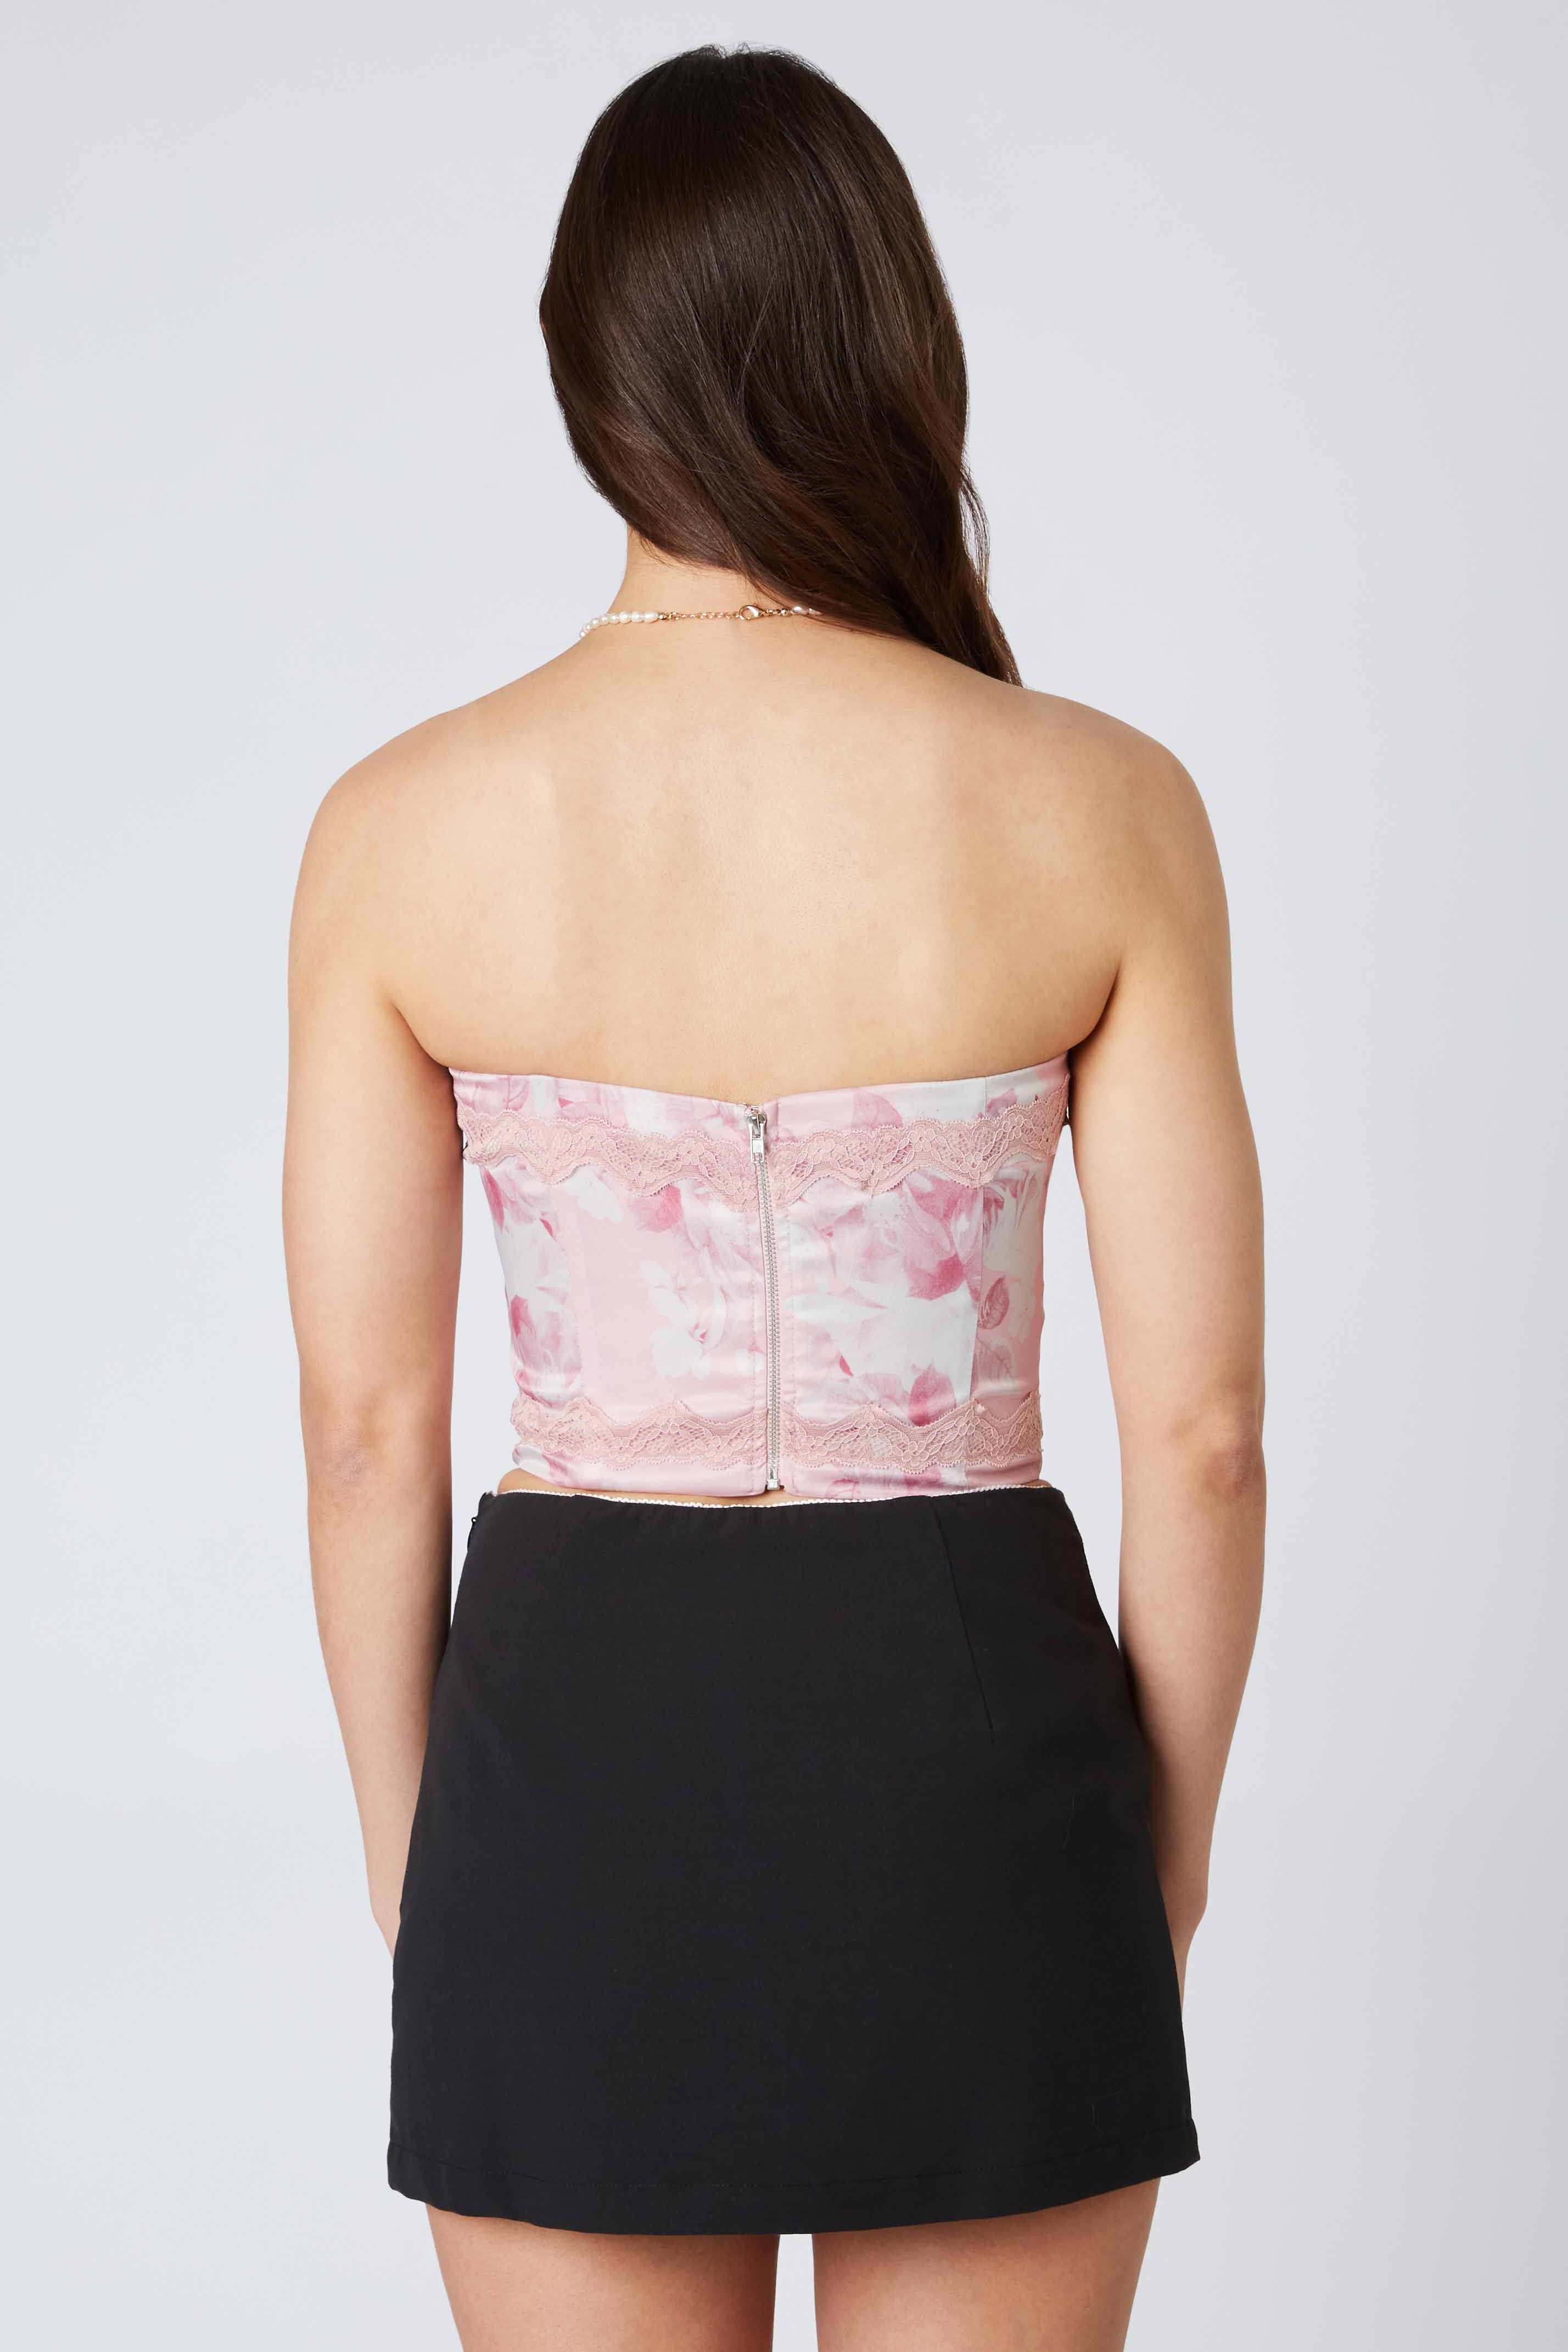 Floral Corset in Dusty Pink Back View